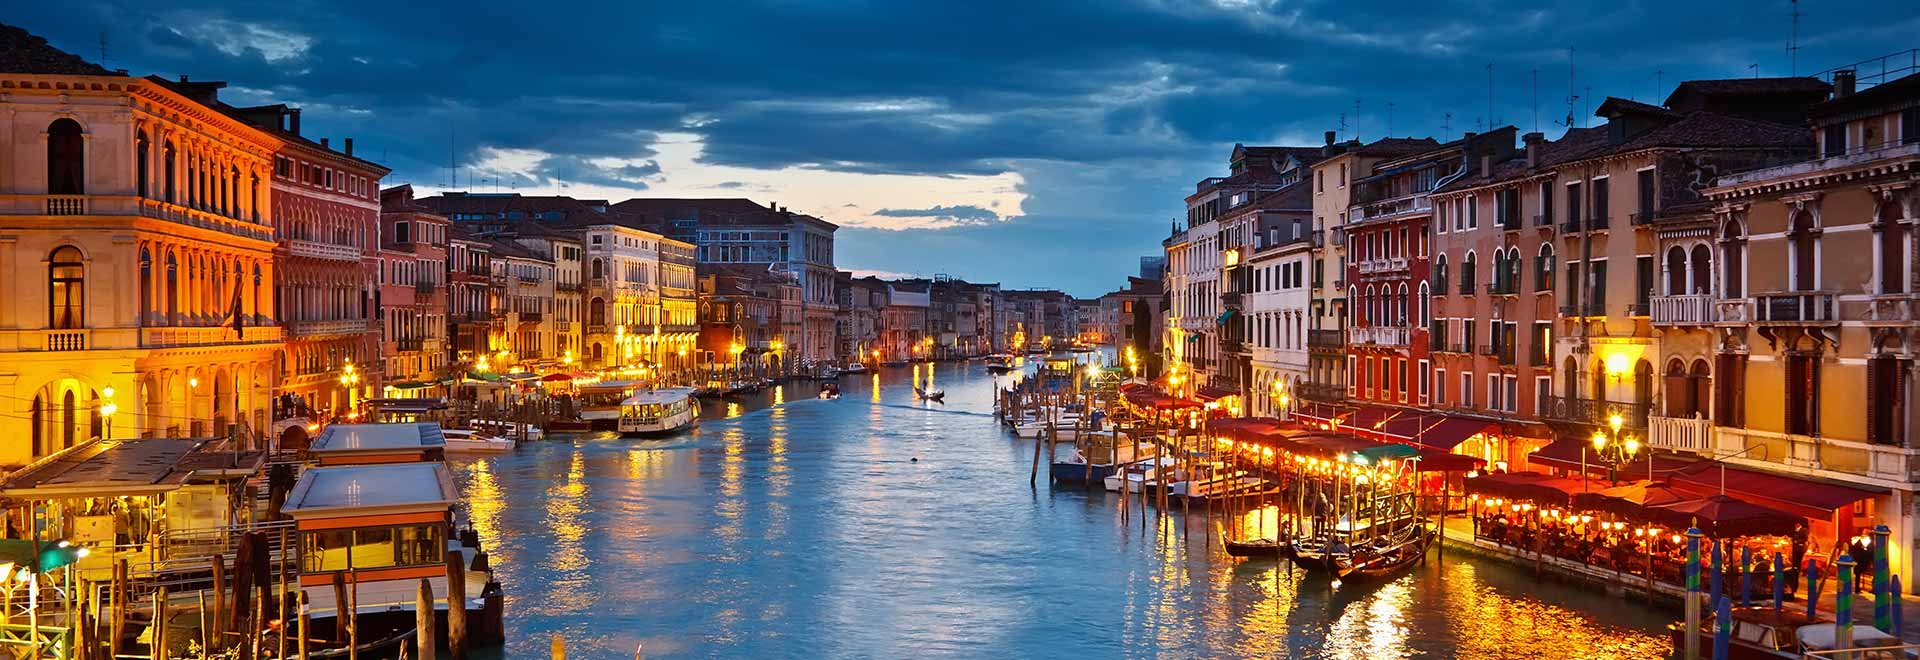 Beautiful picture of Venice taken on our Luxury Travel to Italy